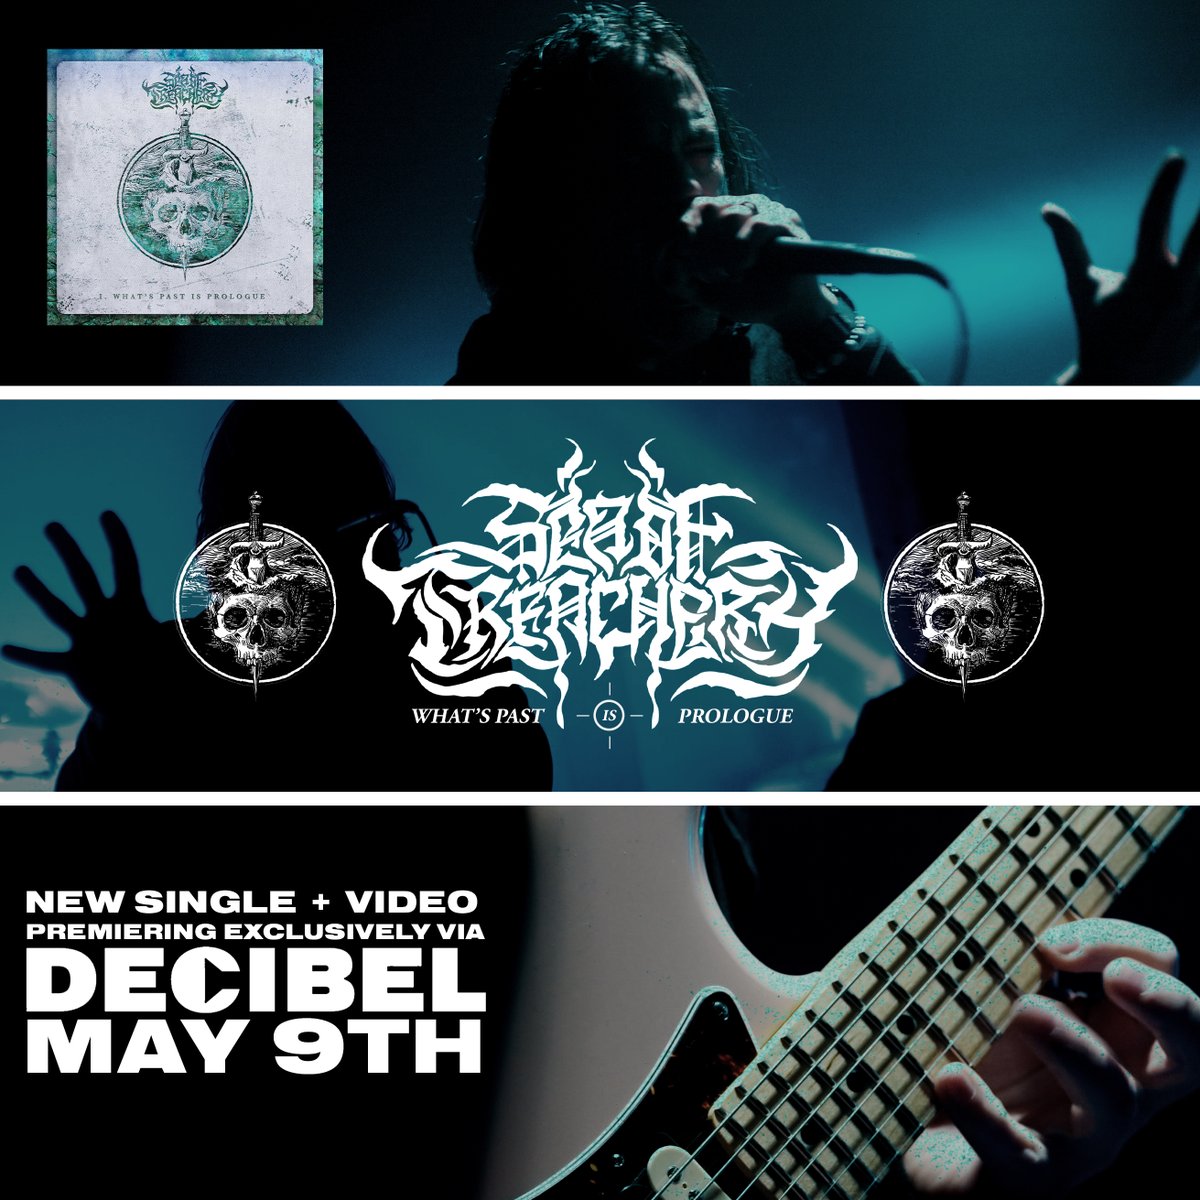 Excited to announce our signing of the Cincinnati metalcore band Sea of Treachery! Their blistering new single and music video, 'What's Past is Prologue' is premiering TODAY exclusively at Decibel: decibelmagazine.com/2024/05/09/vid…